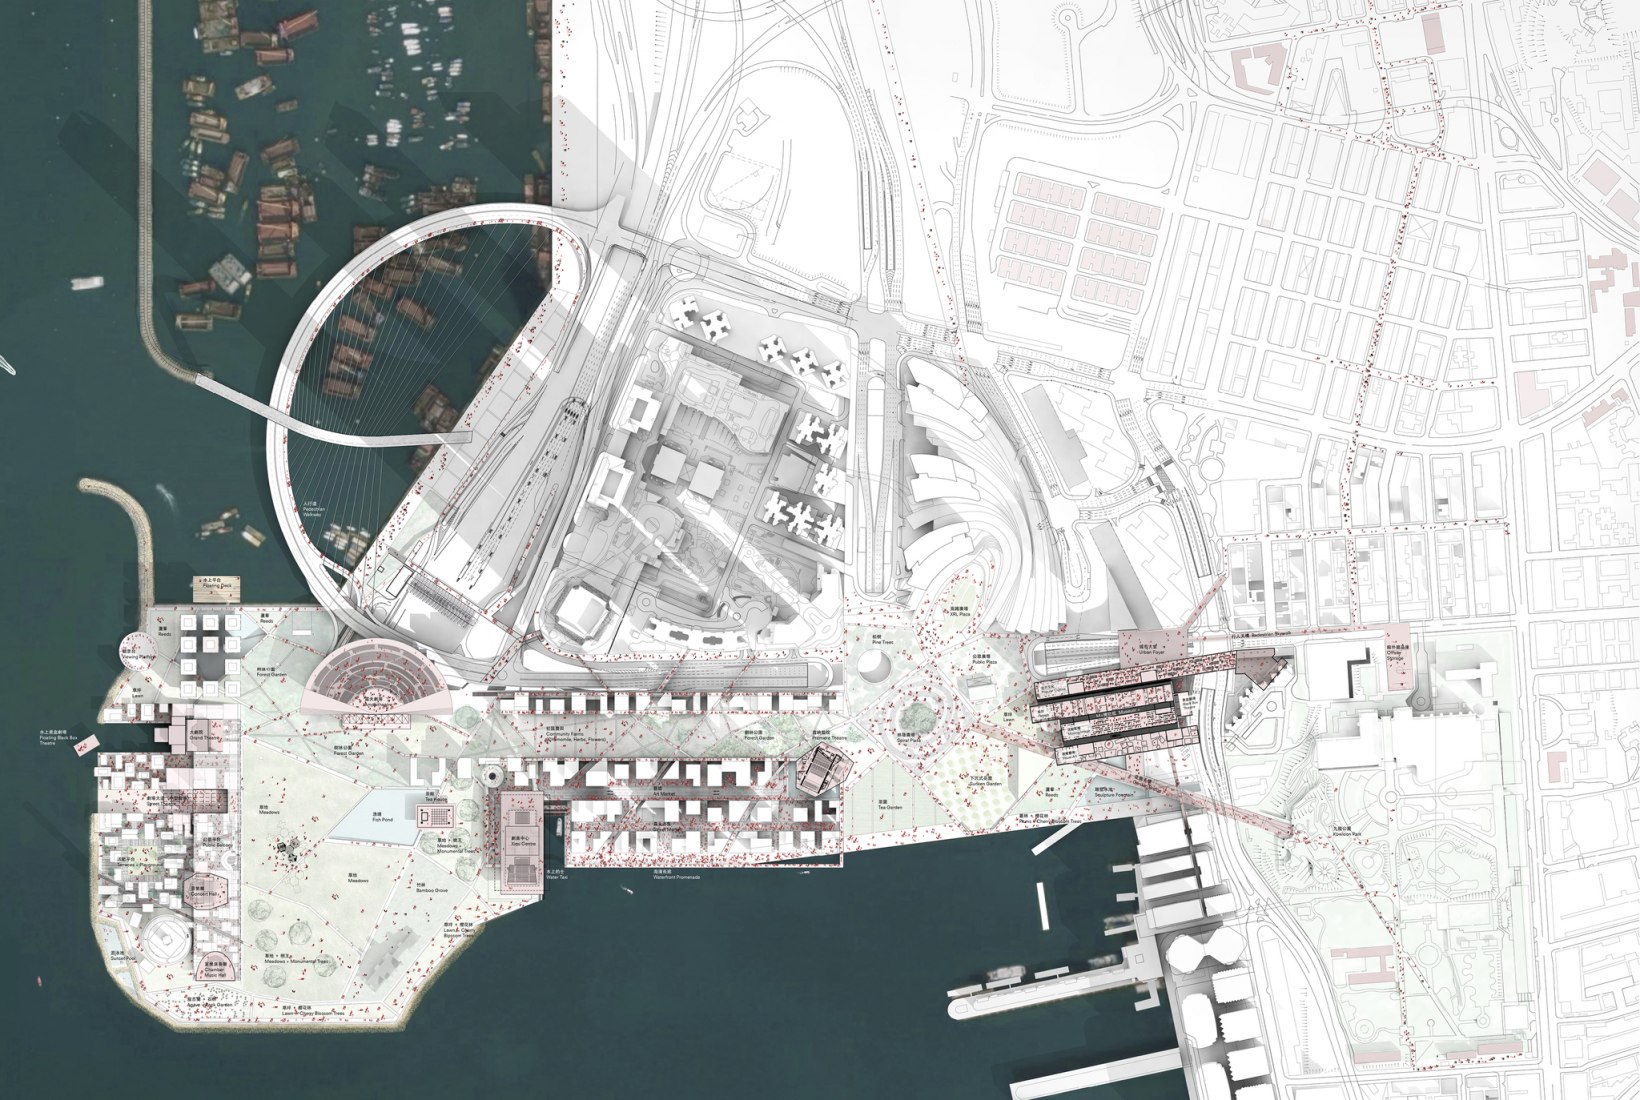 Proposal for a new arts district masterplan in Hong Kong by OMA.